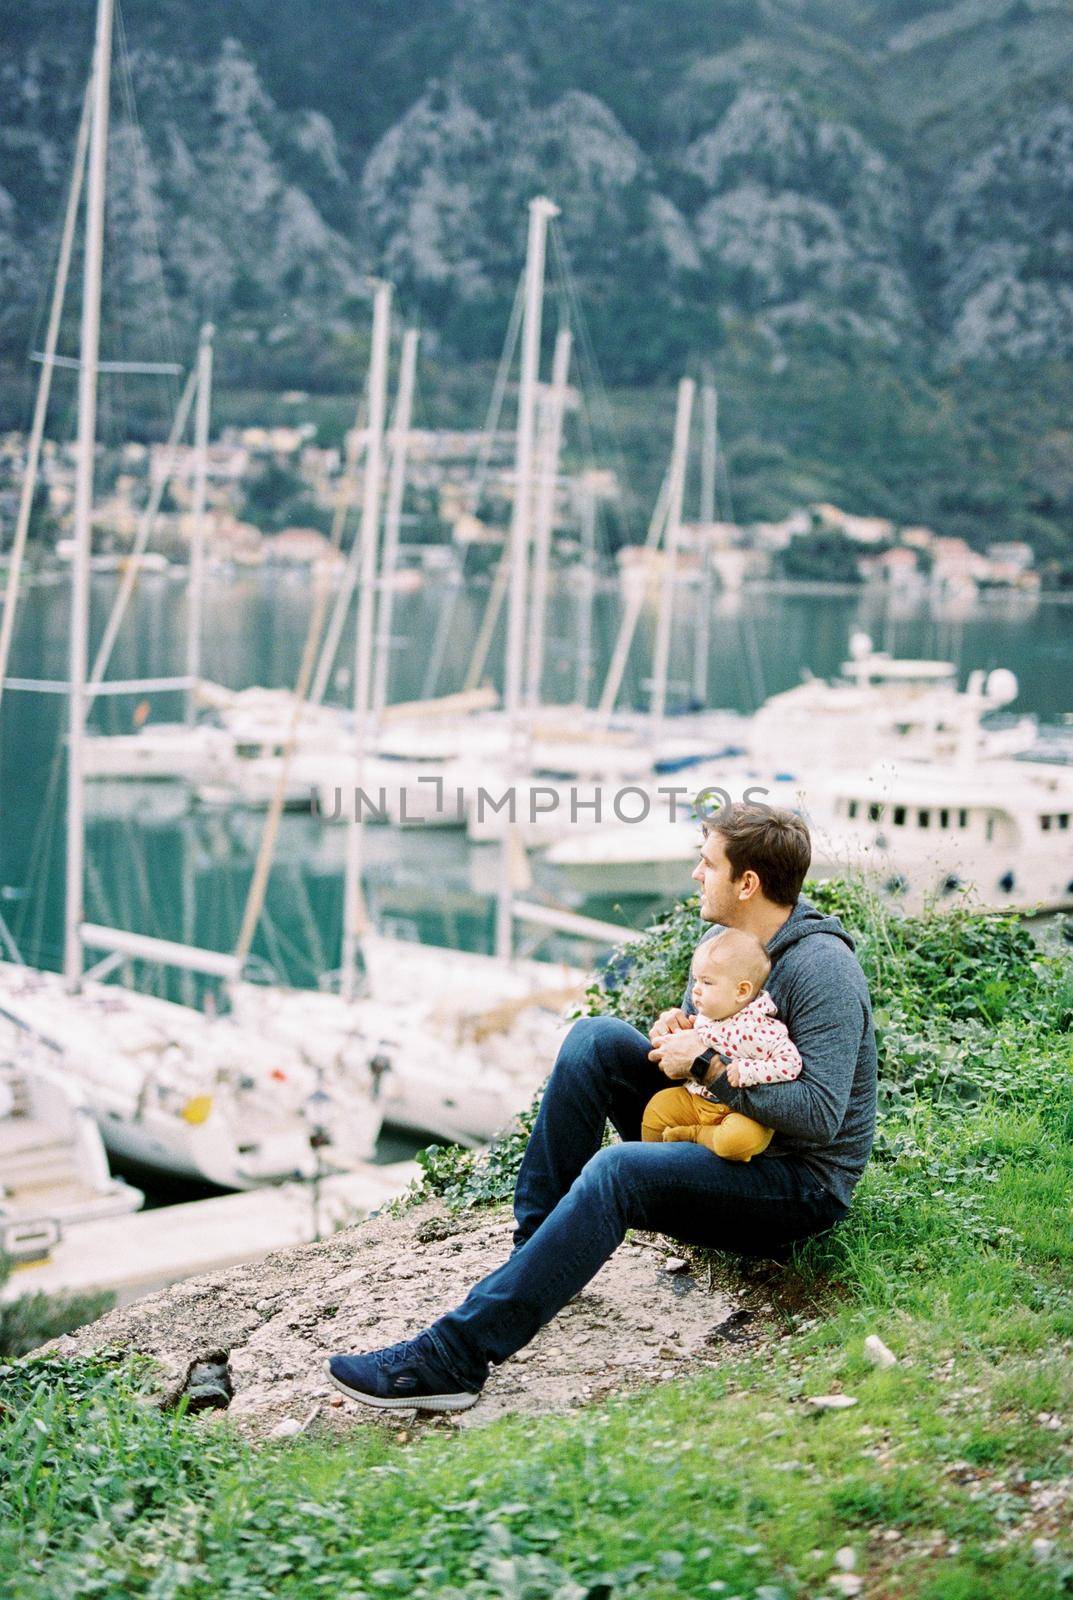 Dad with a baby on his knee sits on a hill and looks at the marina with moored yachts by Nadtochiy